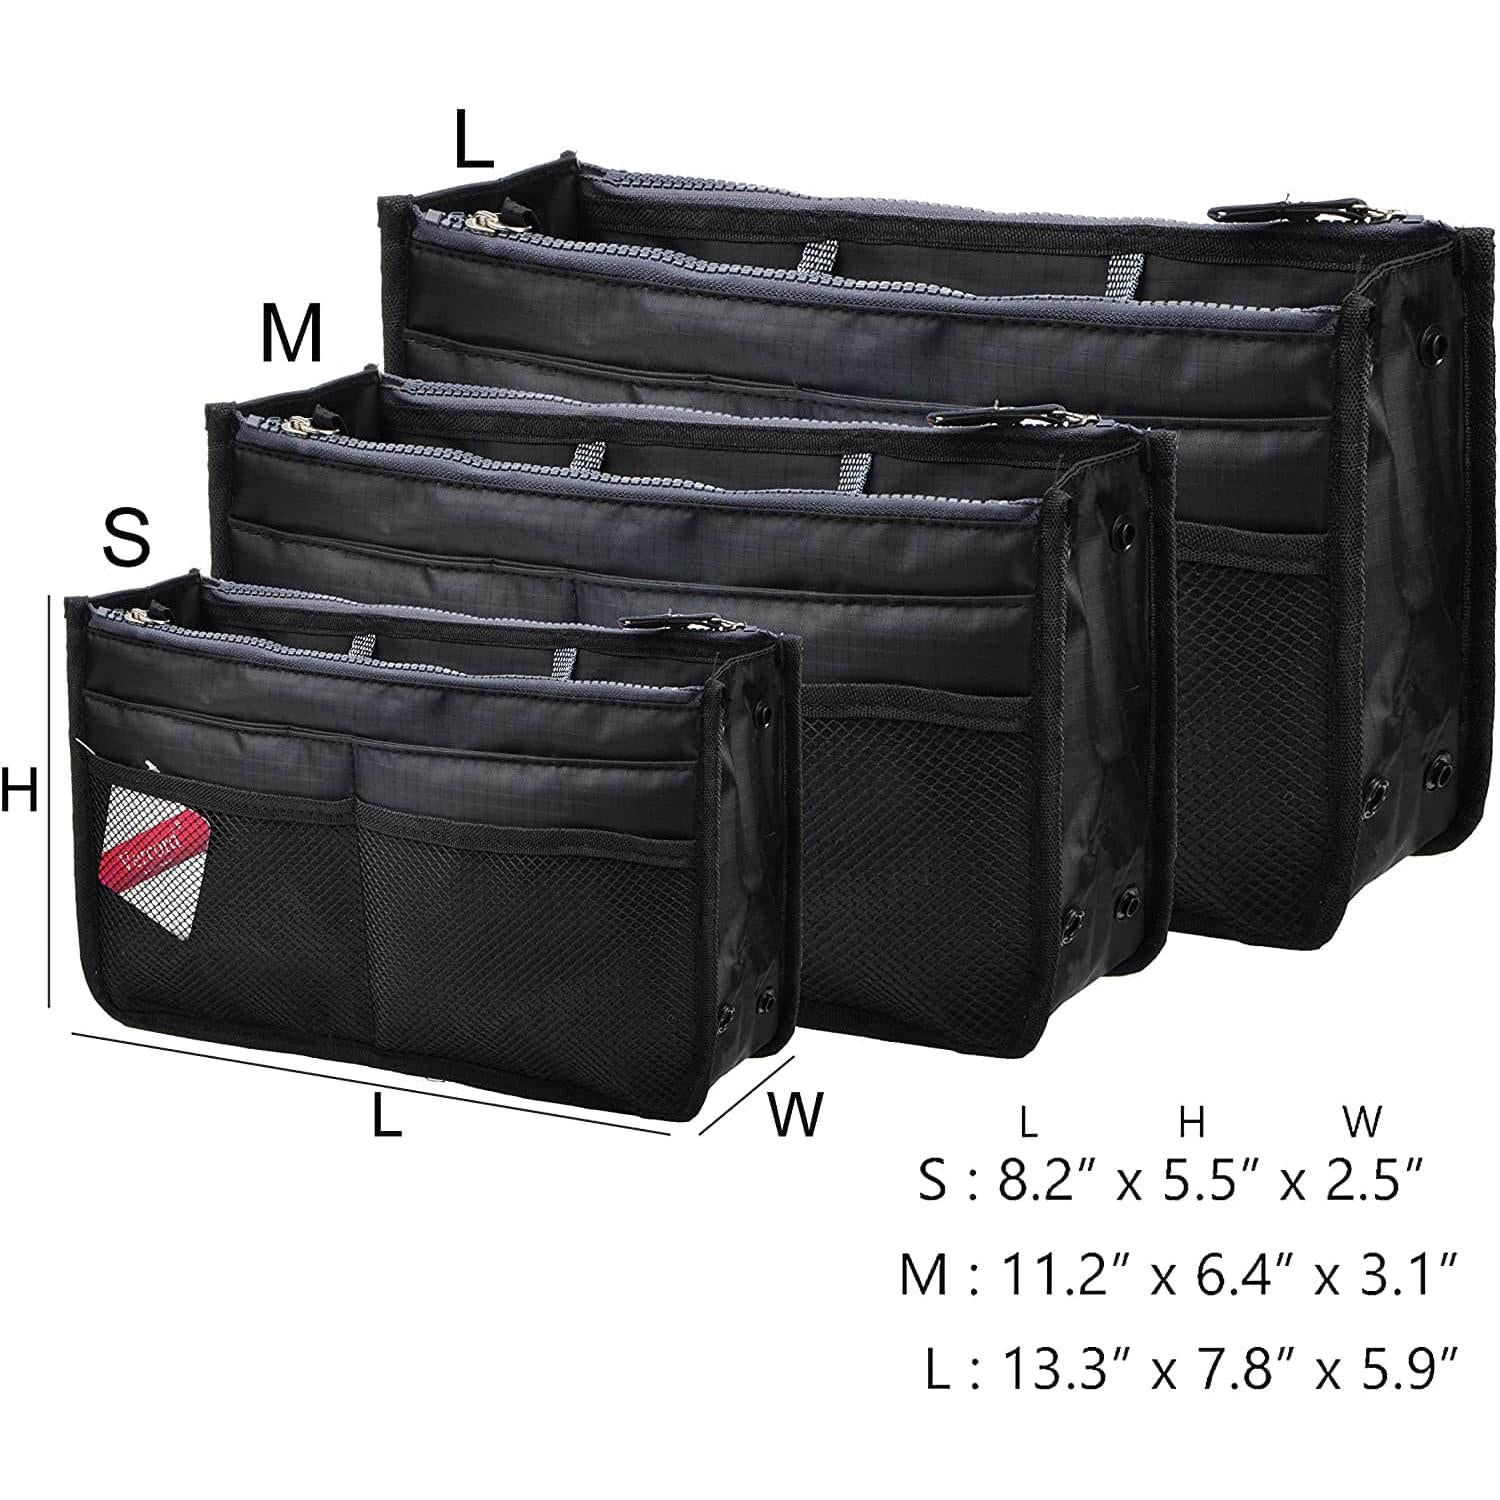 LEXSION Organizer,Bag Organizer,Insert purse organizer with 2 packs in one  set fit NeoNoe Noé Series perfectly Black